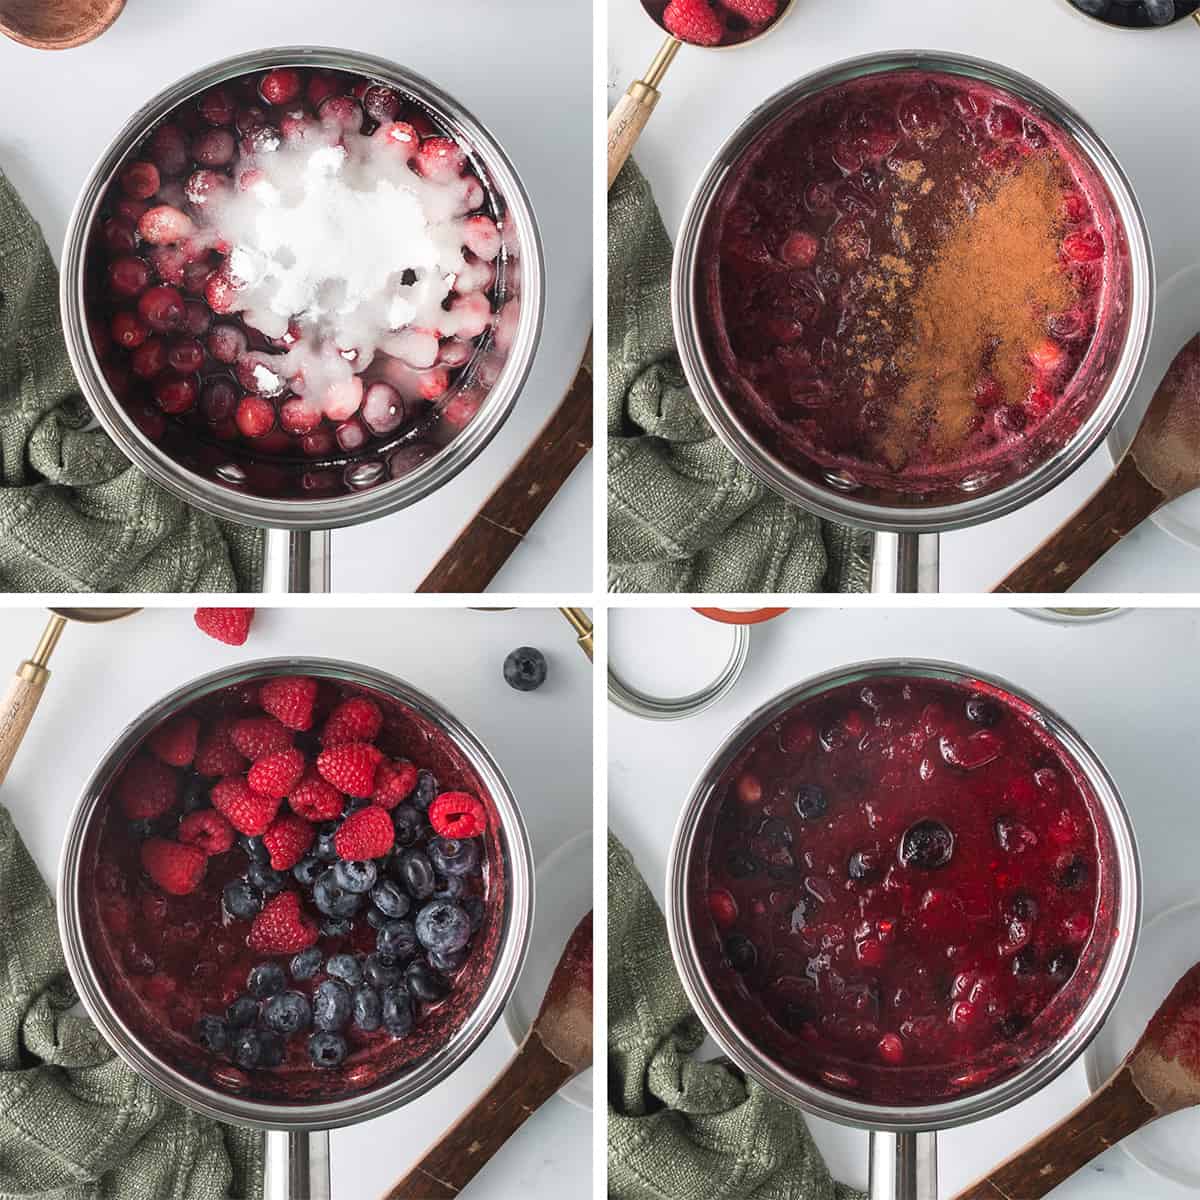 Four images of fresh cranberries, spices, and fresh berries cooking in a saucepan.